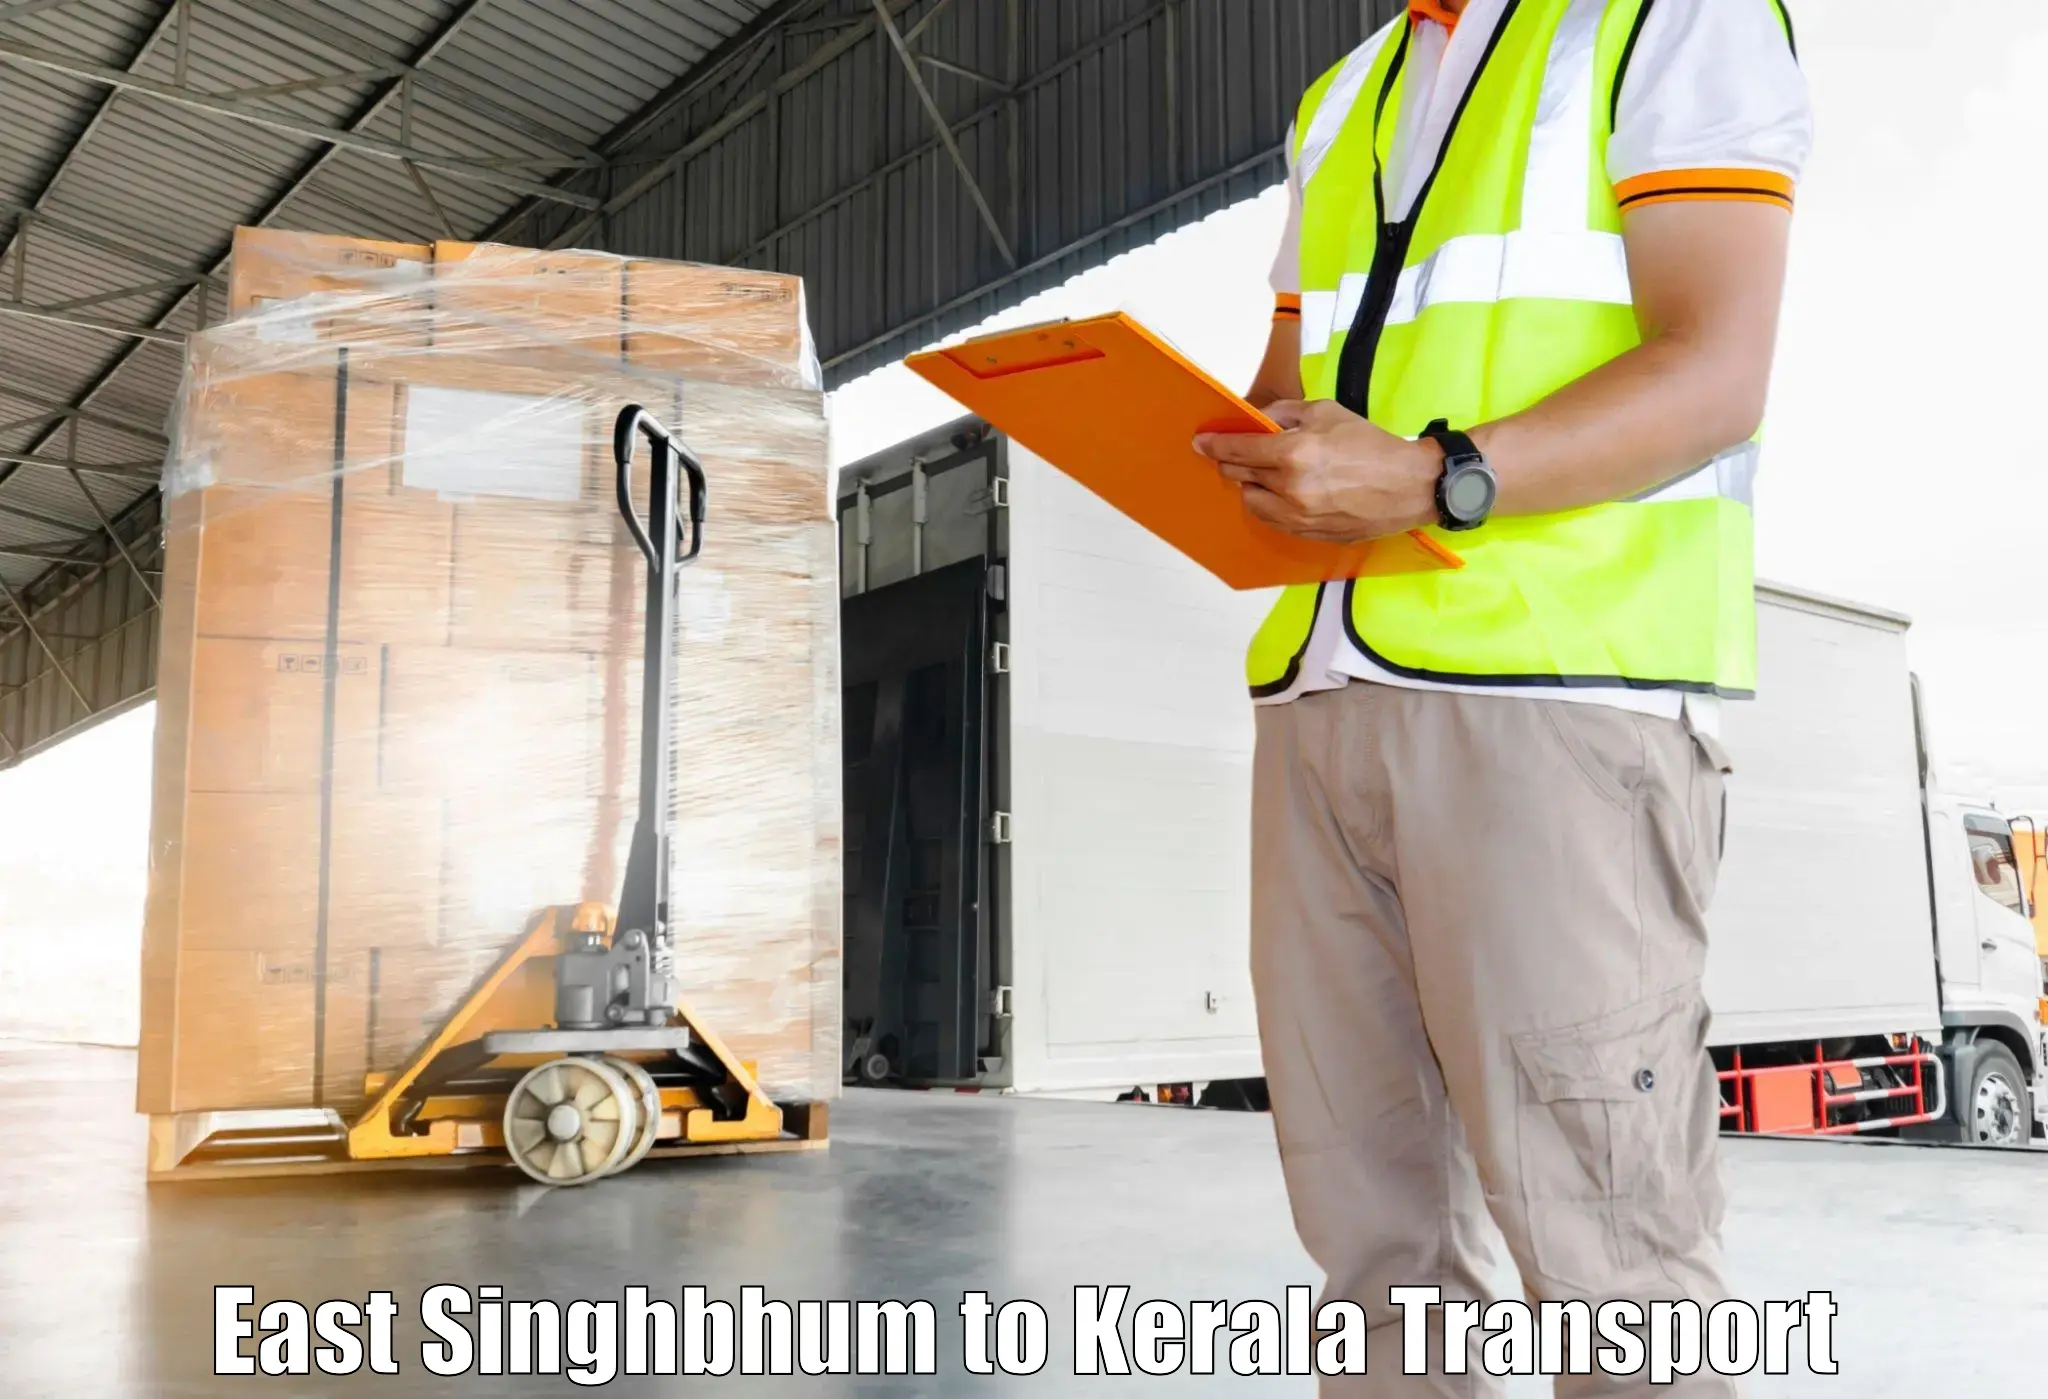 Transport shared services East Singhbhum to Kochi